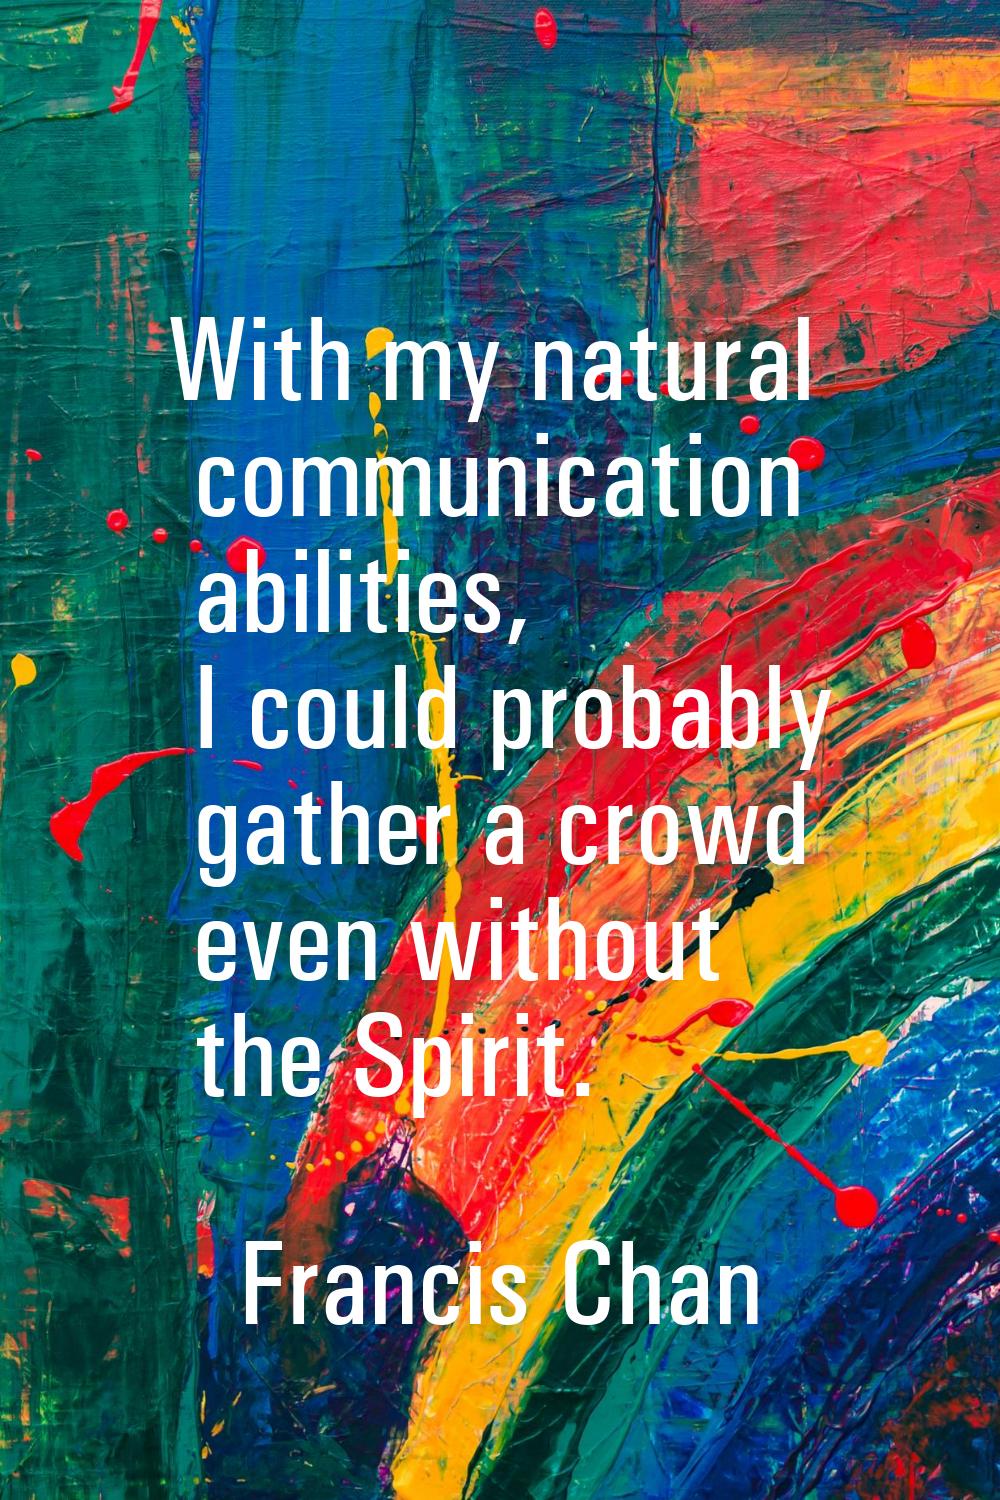 With my natural communication abilities, I could probably gather a crowd even without the Spirit.